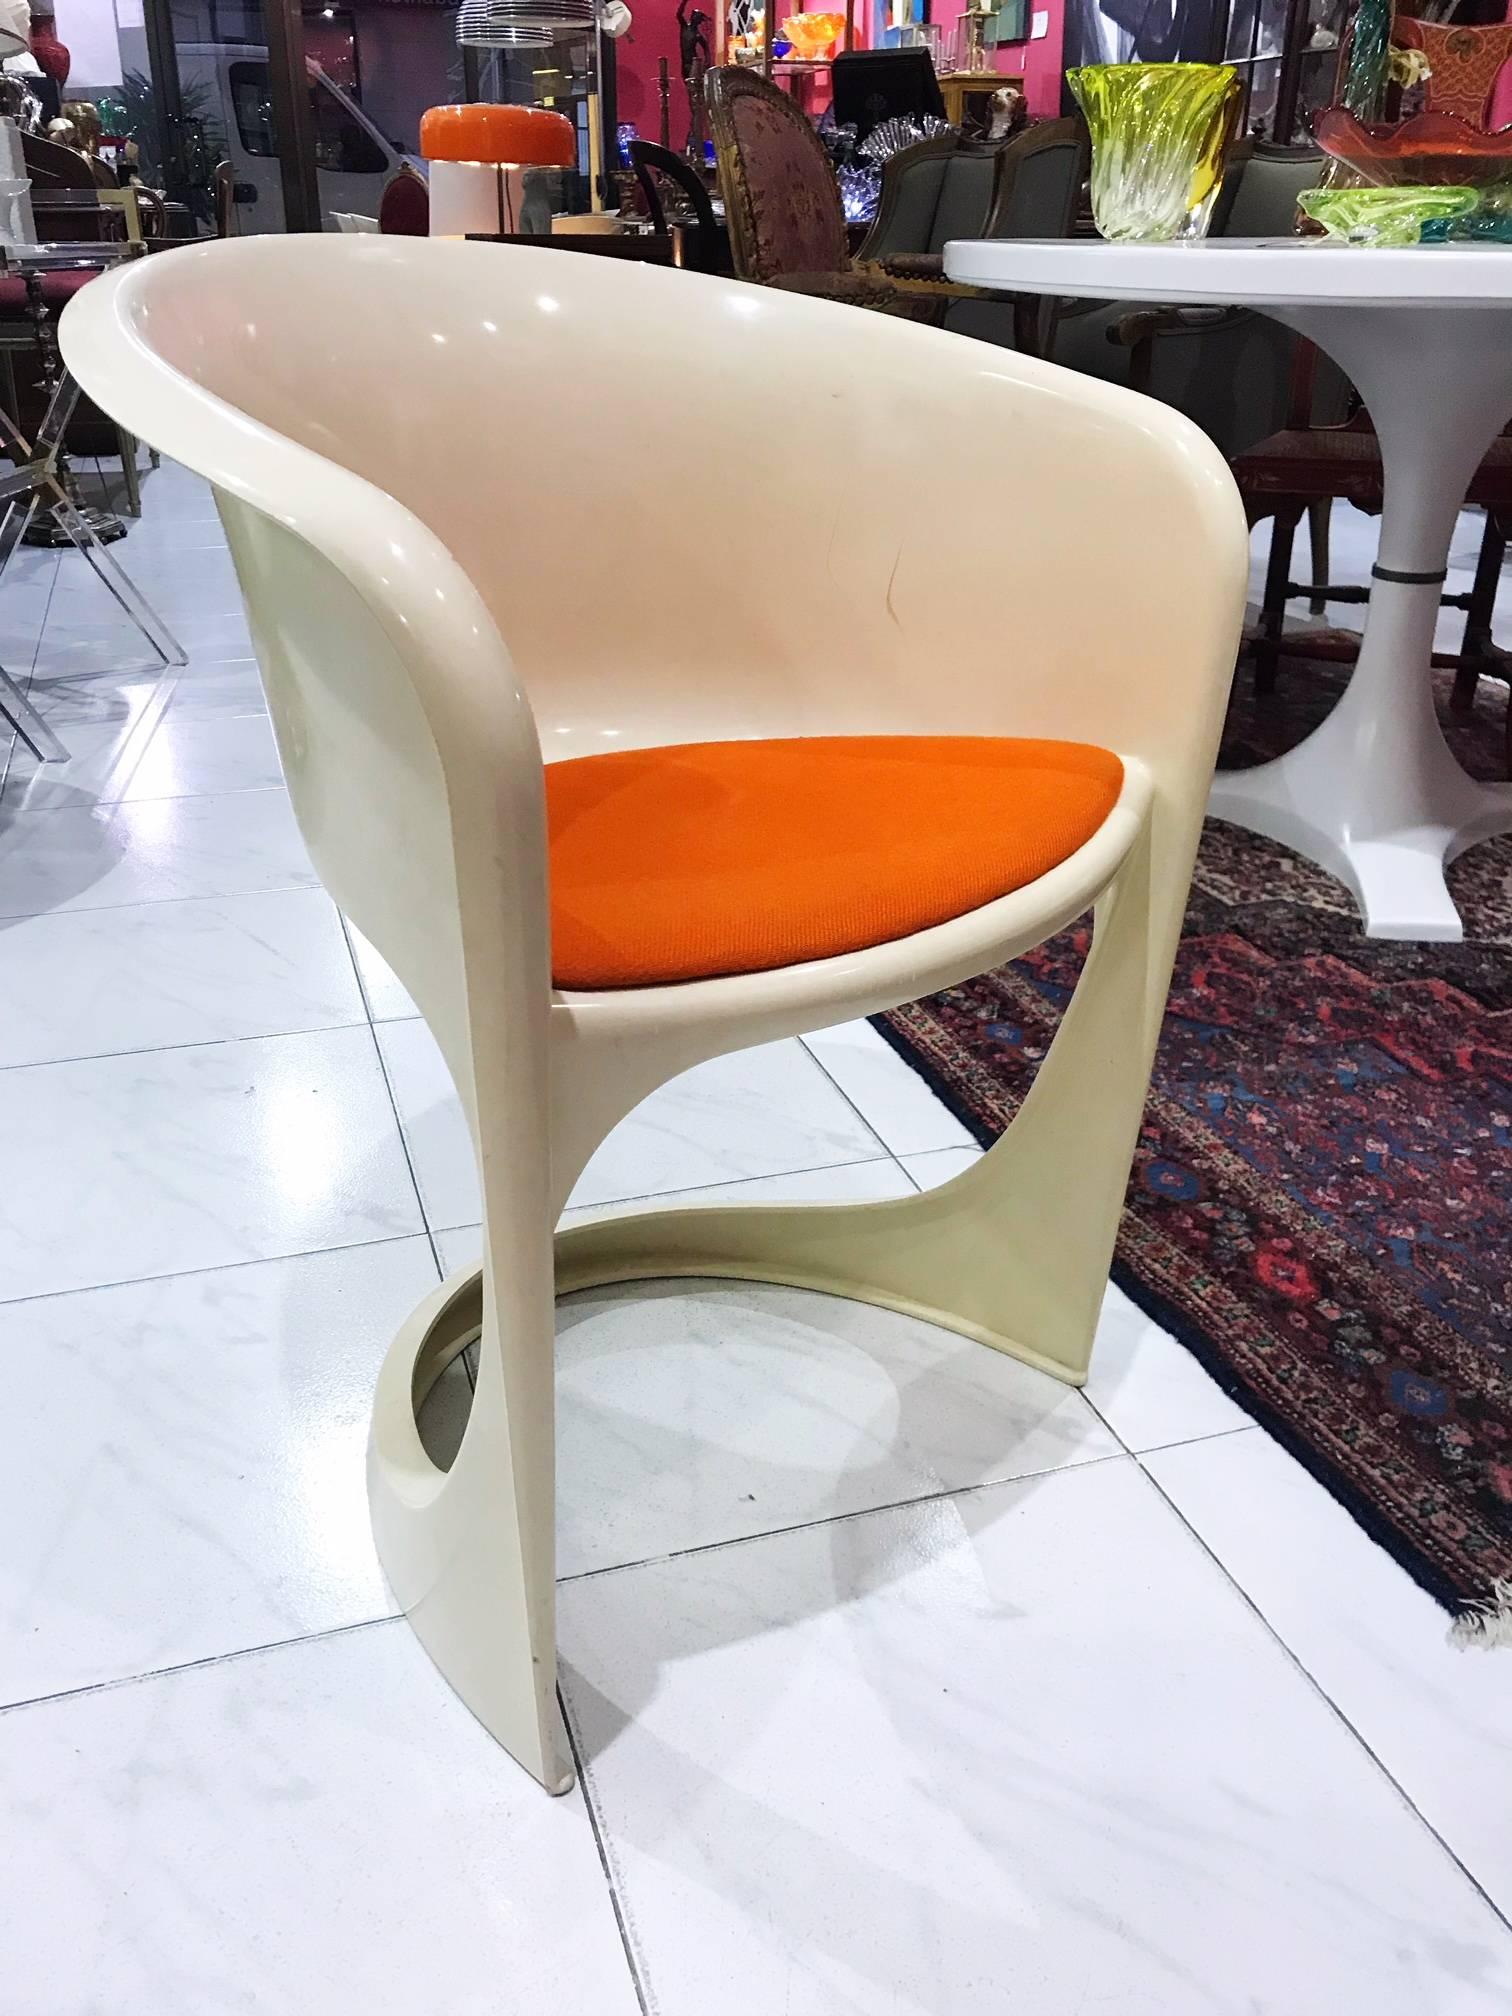 This is a stunning pair of Mid-Century Modern molded chairs by the Danish firm Cado. These were designed by architect and designer Steen Ostergaard (born 1935). Each chair features an arch crest with rolled edge over a molded barrel back with